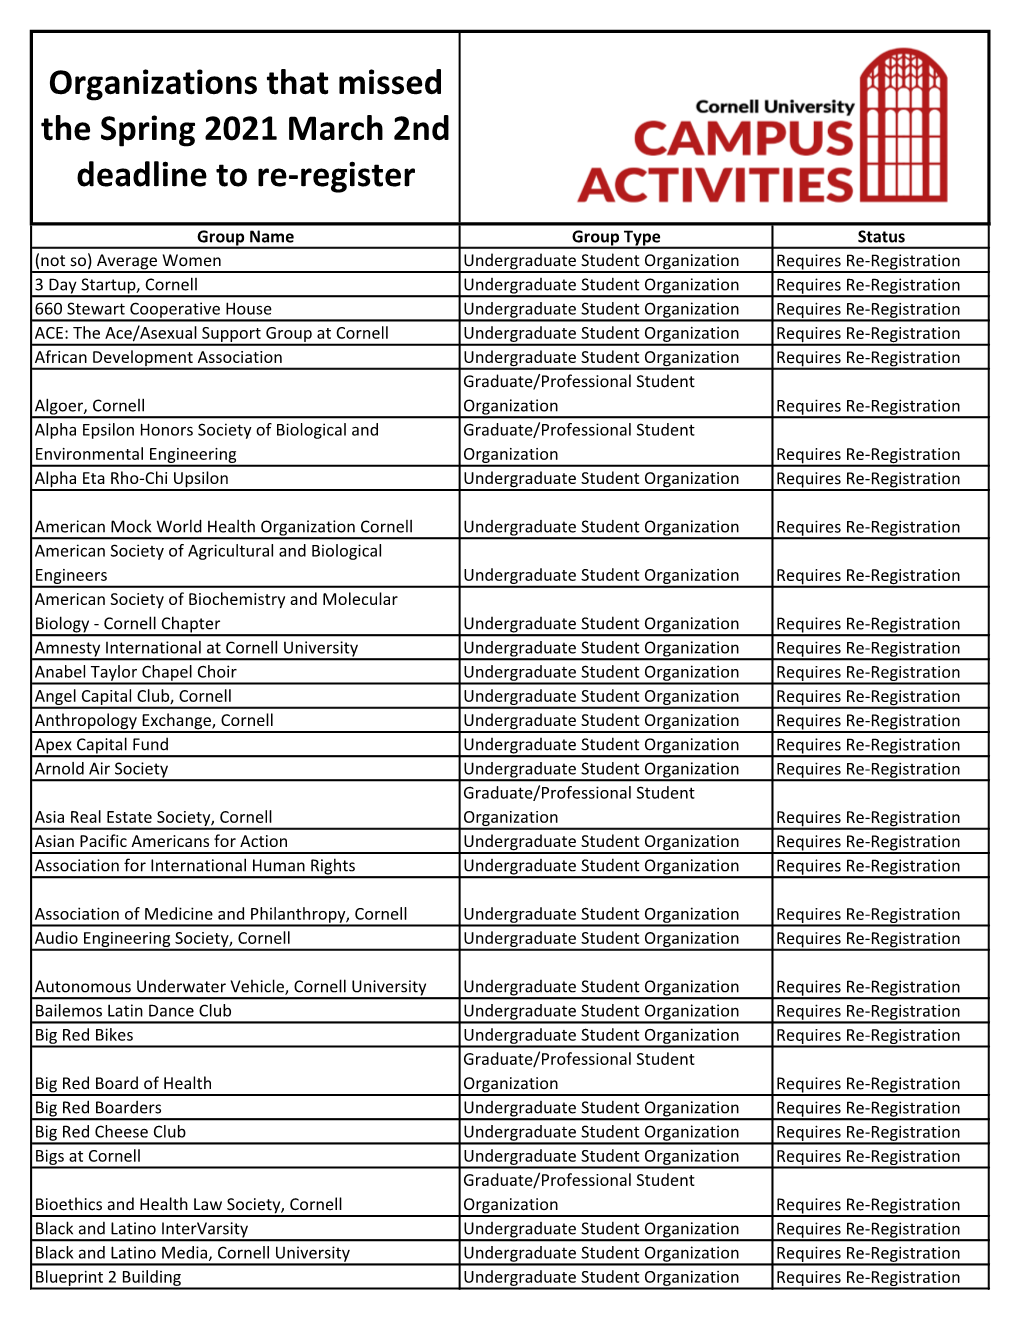 Organizations That Missed the Spring 2021 March 2Nd Deadline to Re-Register